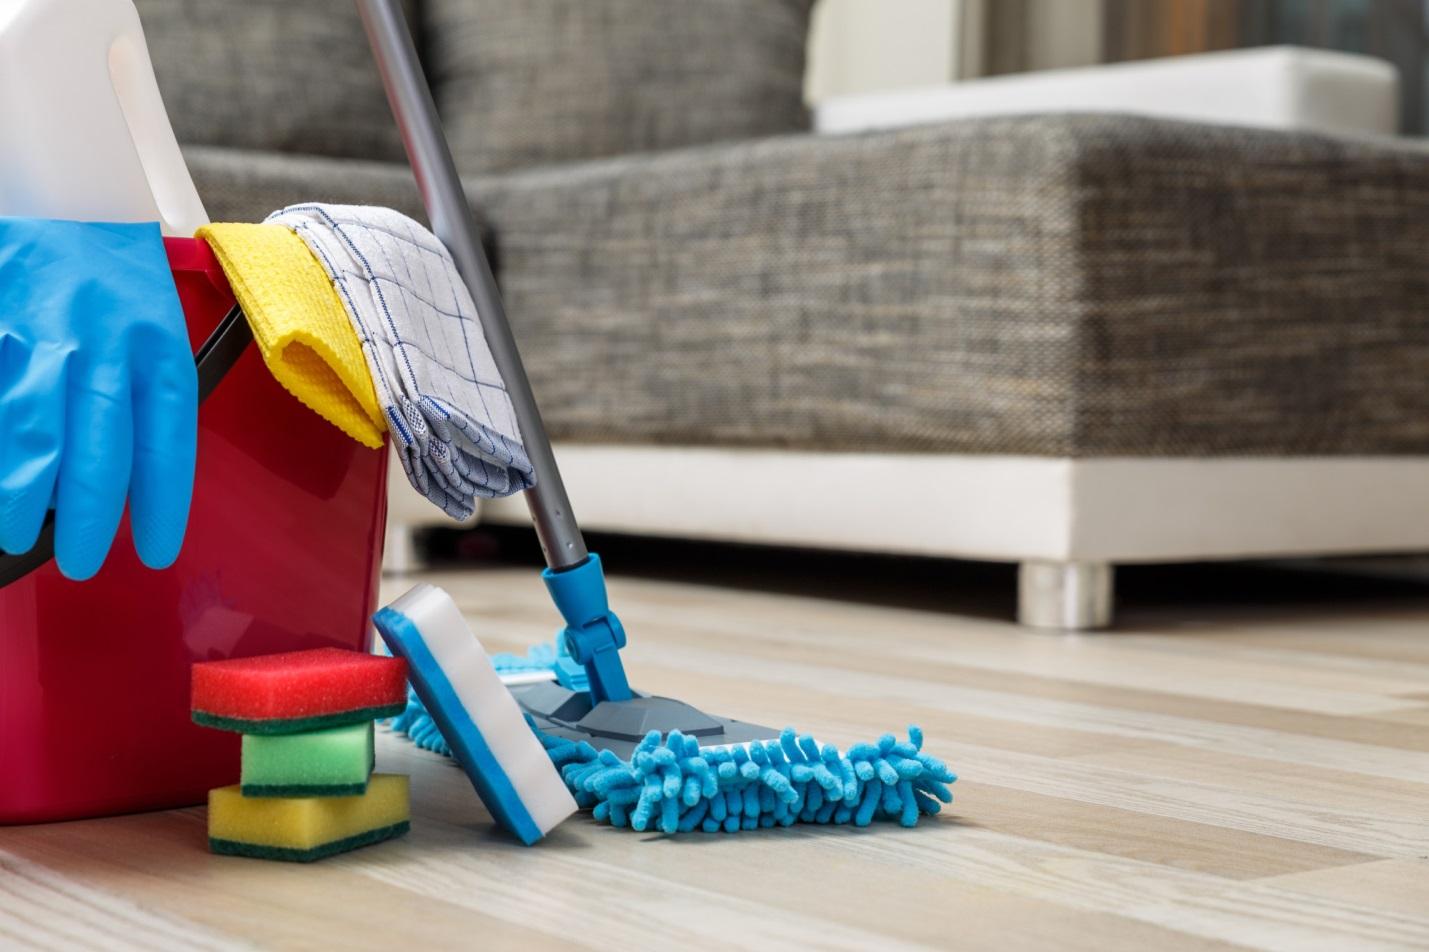 A mop on a wooden floor during deep cleaning.